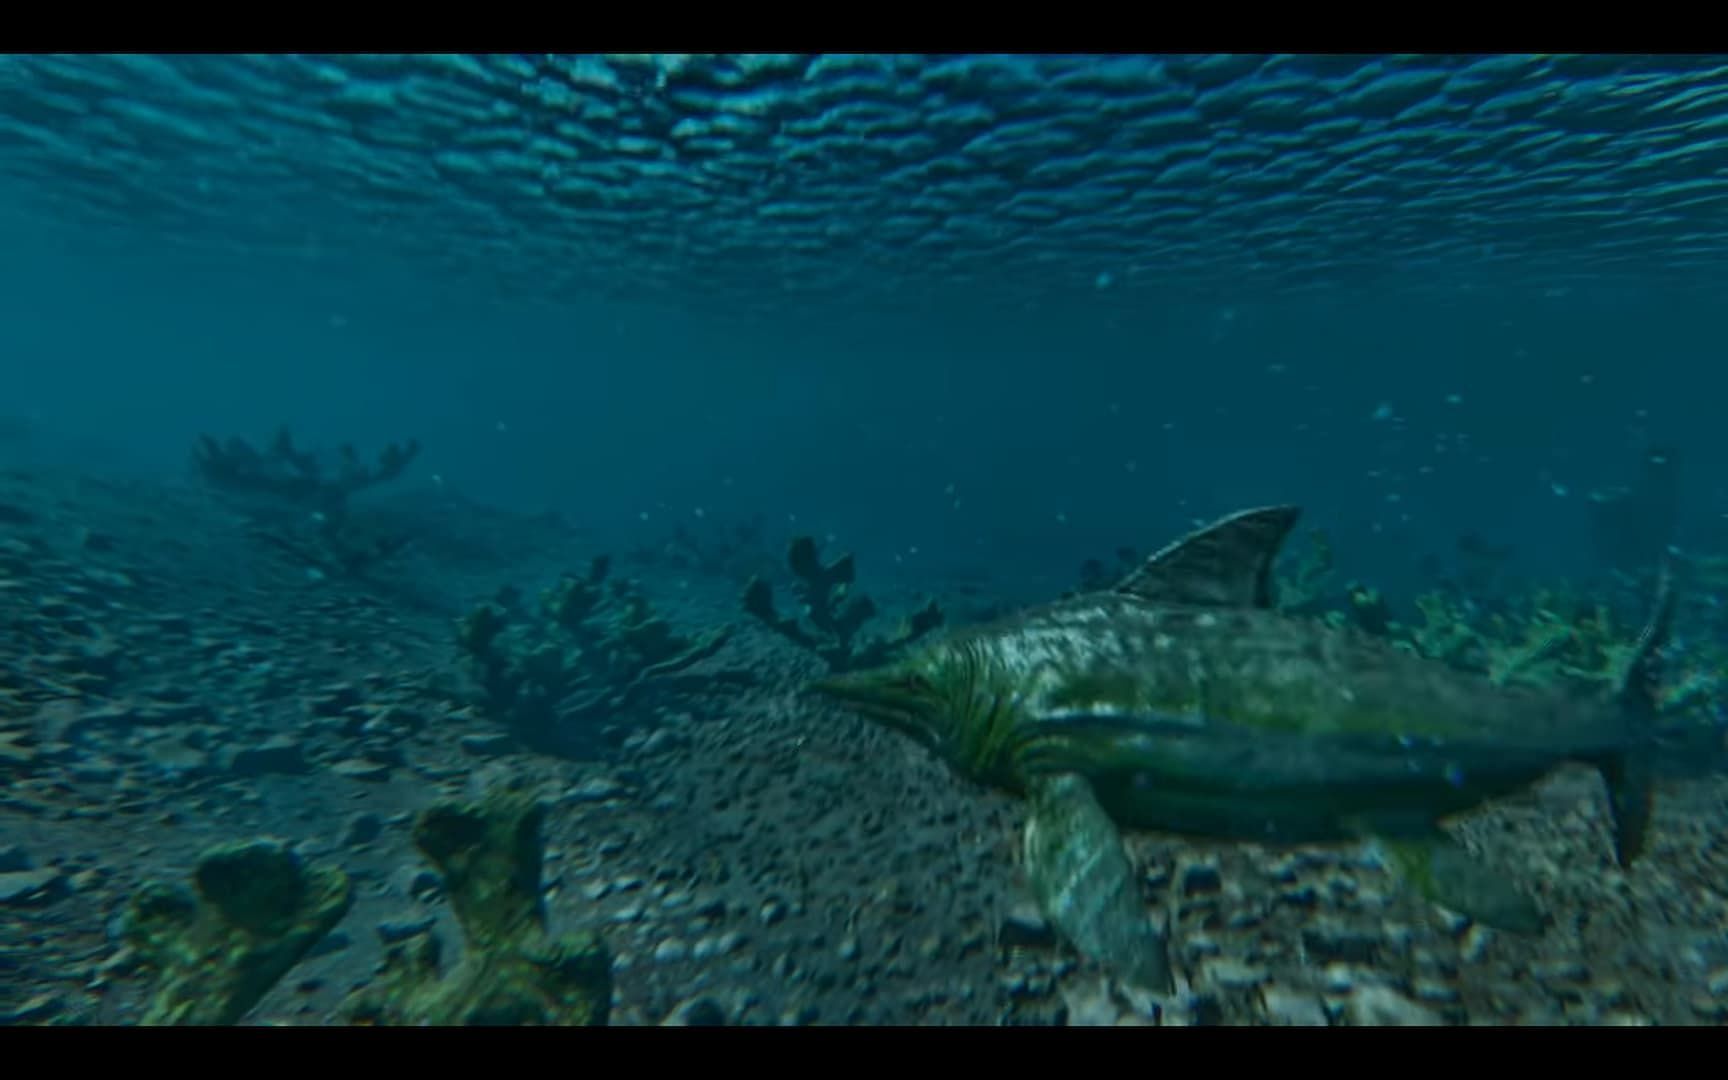 Ichthyosaurus can be found even in shallow waters in the ocean of Ark Survival Ascended (Image via Studio Wildcard)